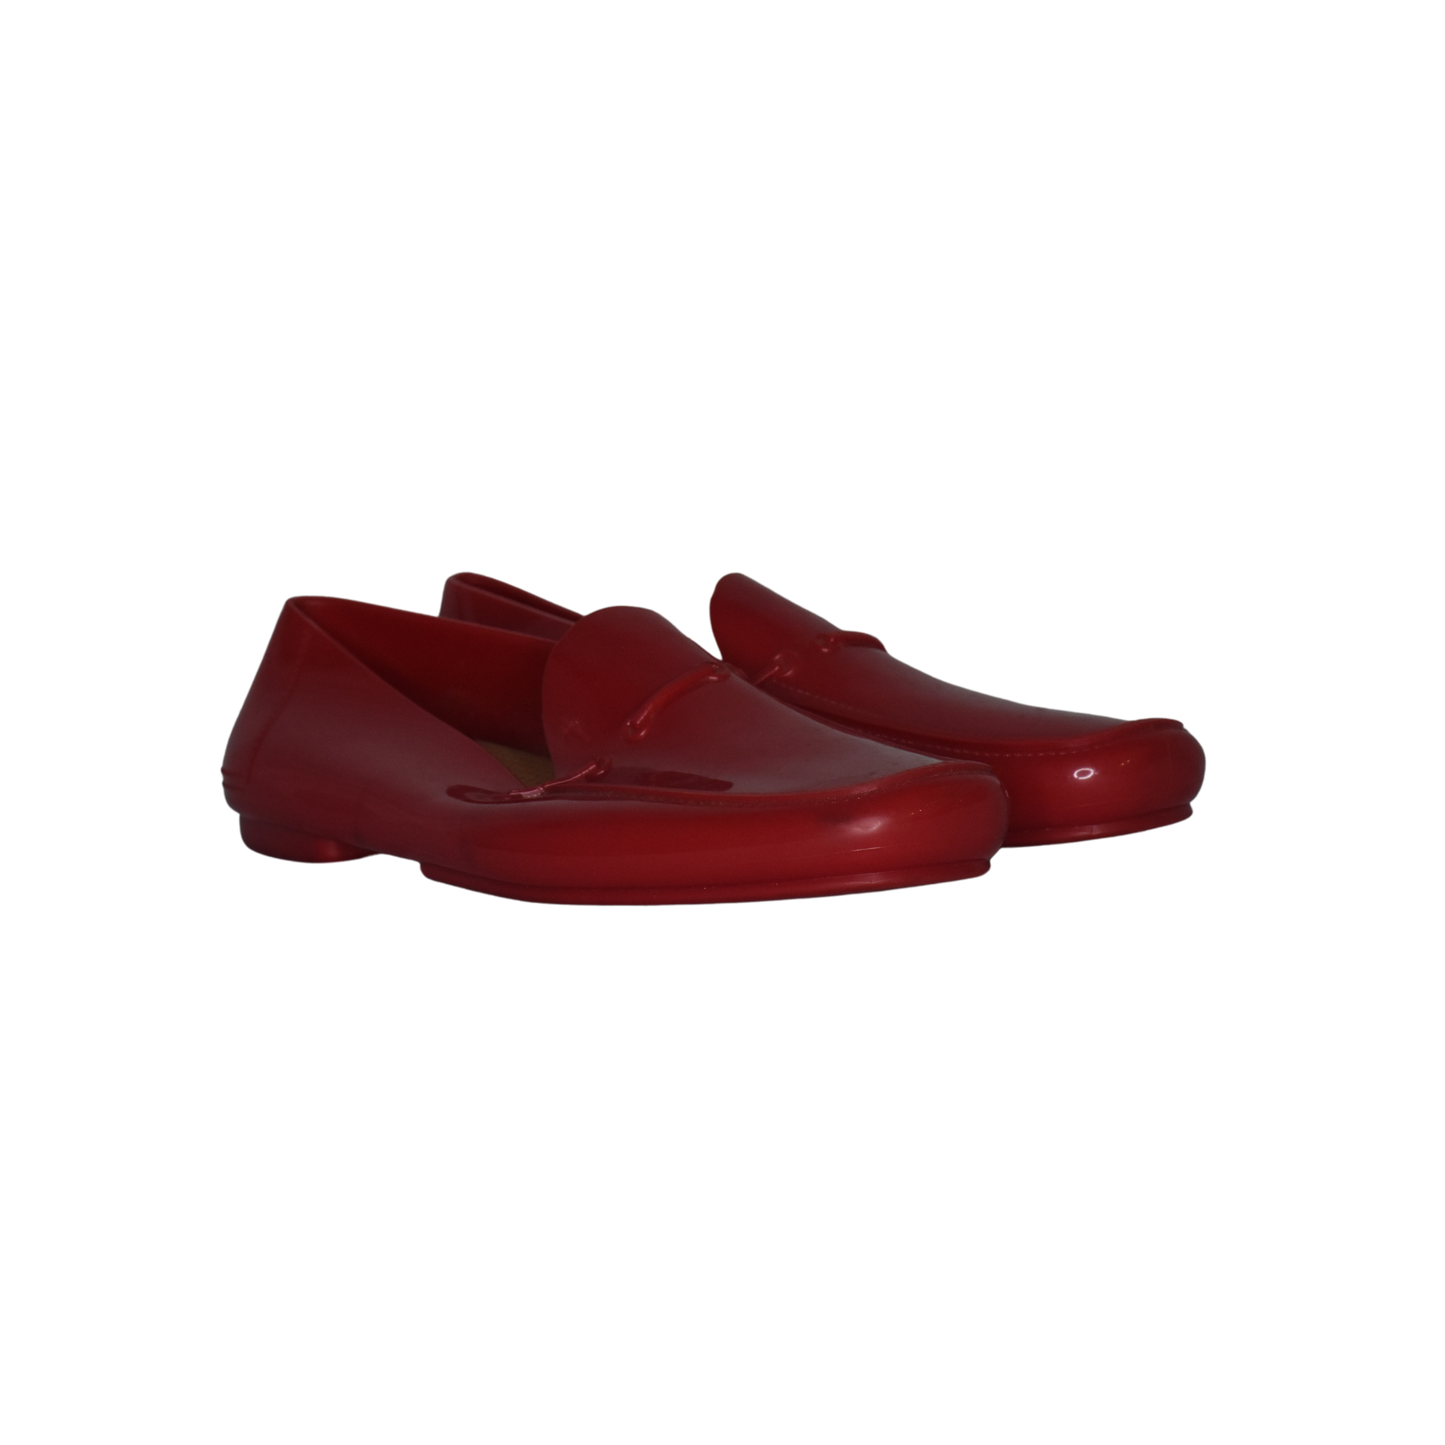 Paciotti Shoes Red Size 43 SKU 000281-6